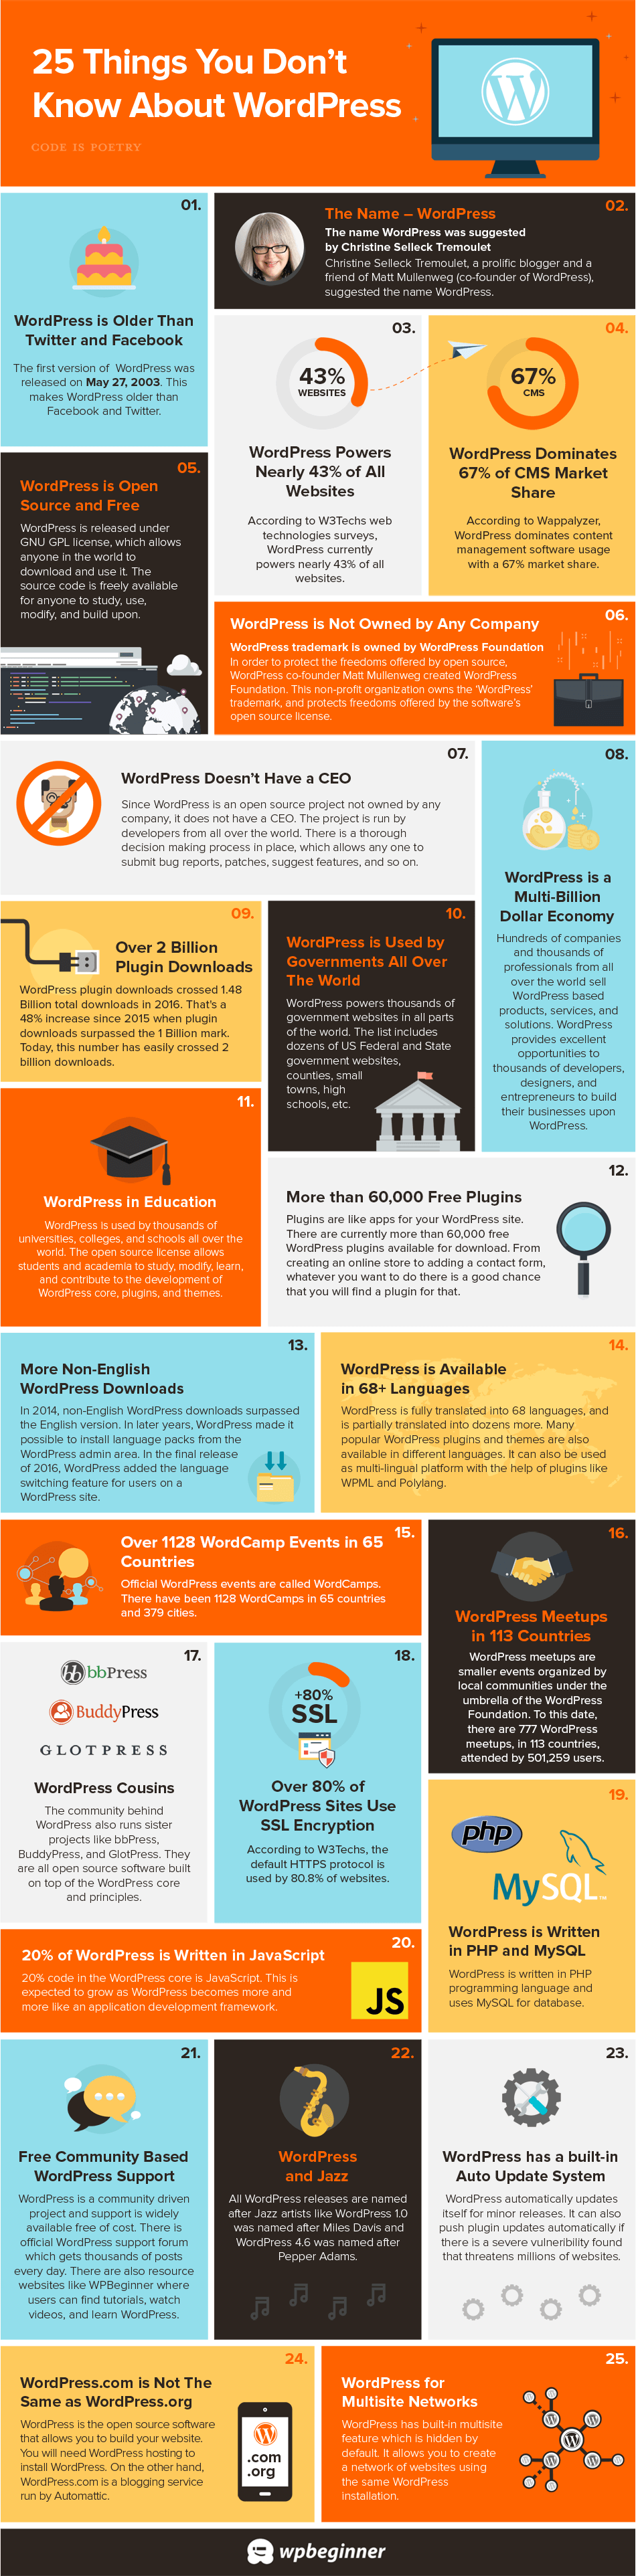 25 Interesting Facts About WordPress (Infographic)